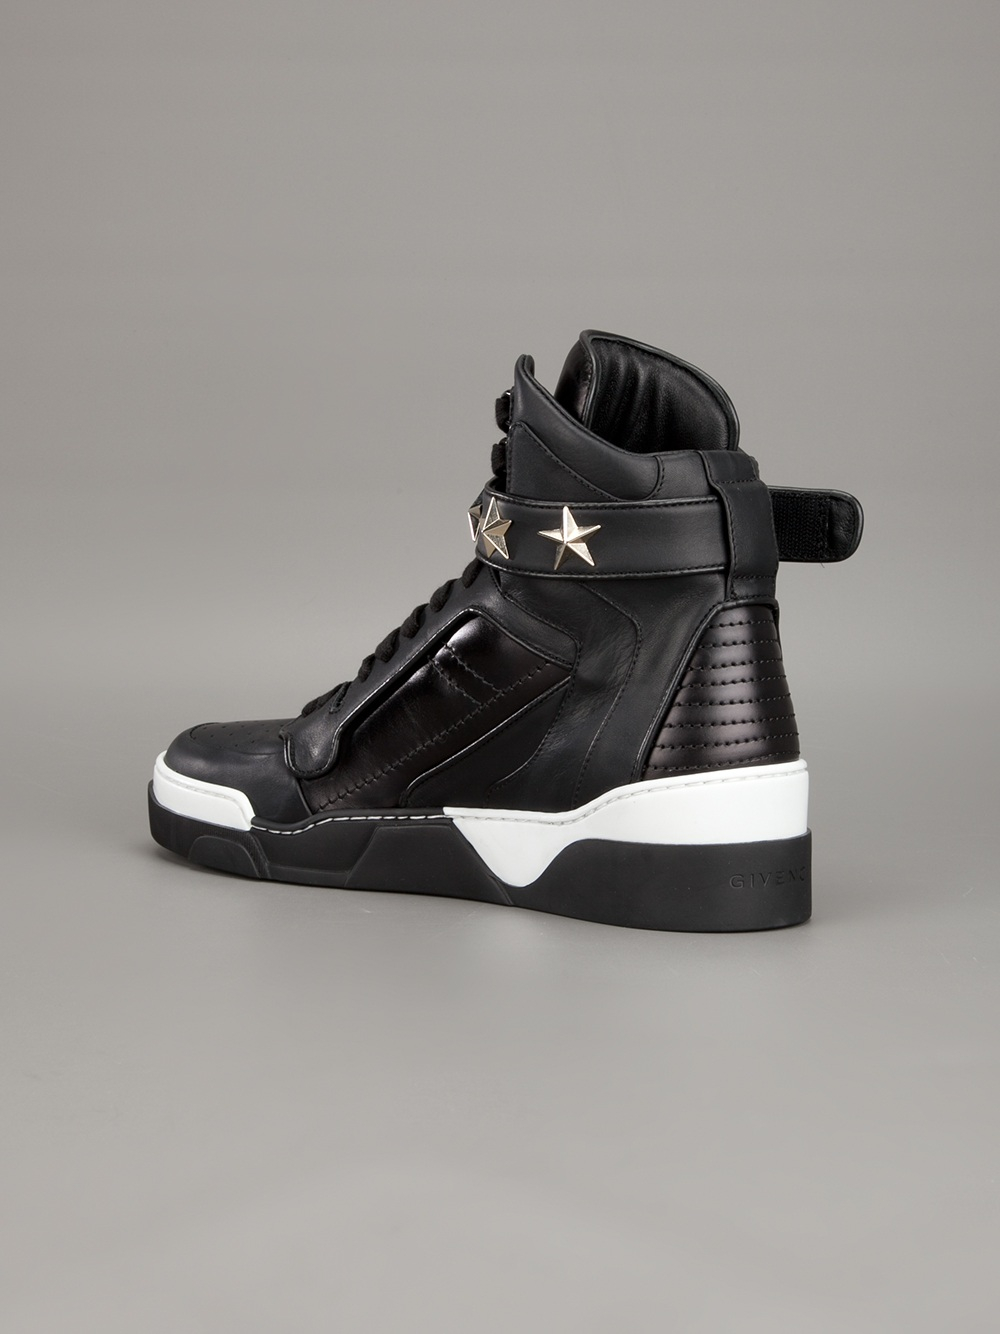 Givenchy Star Studded Hitop Sneaker in Black for Men - Lyst